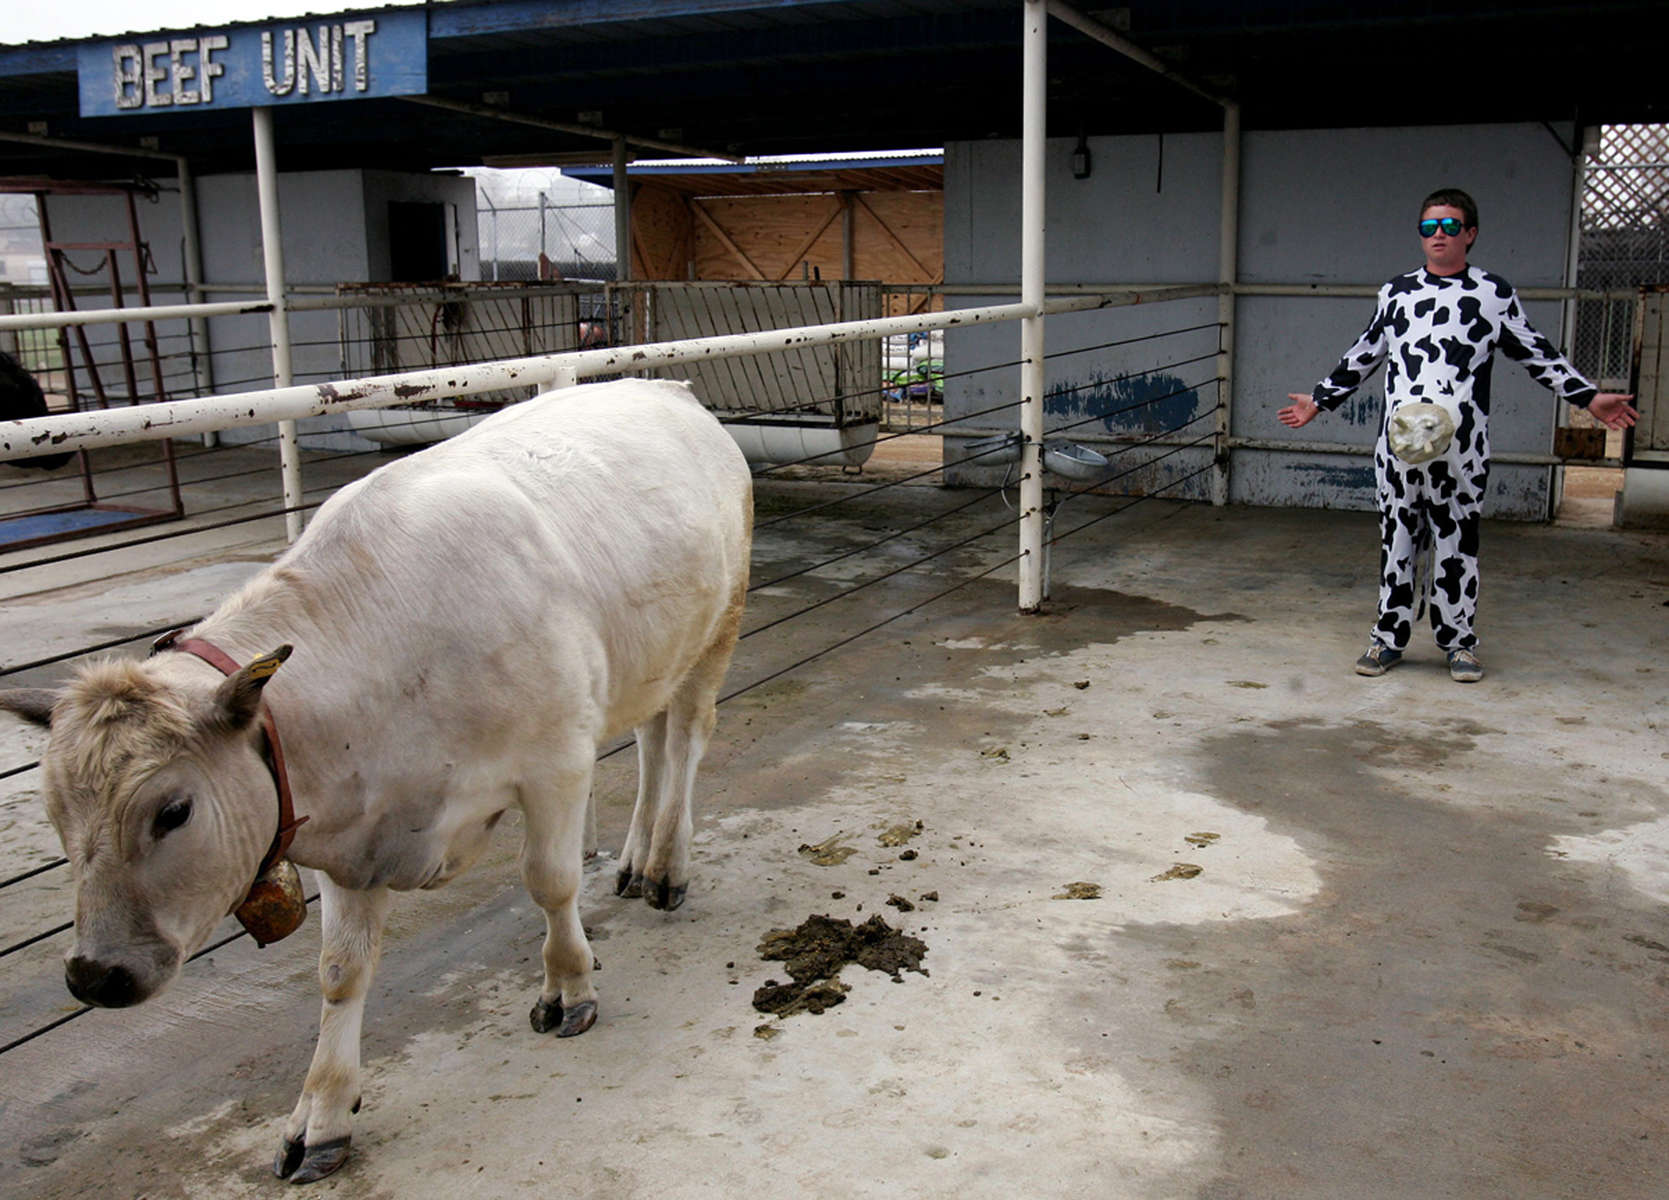 A steer shows no interest in Norco High School student Brad Bishop who was trying to pet him while entertaining second graders during the National Ag Day celebration in Norco, Calif. (The Press-Enterprise/ Mark Zaleski) 